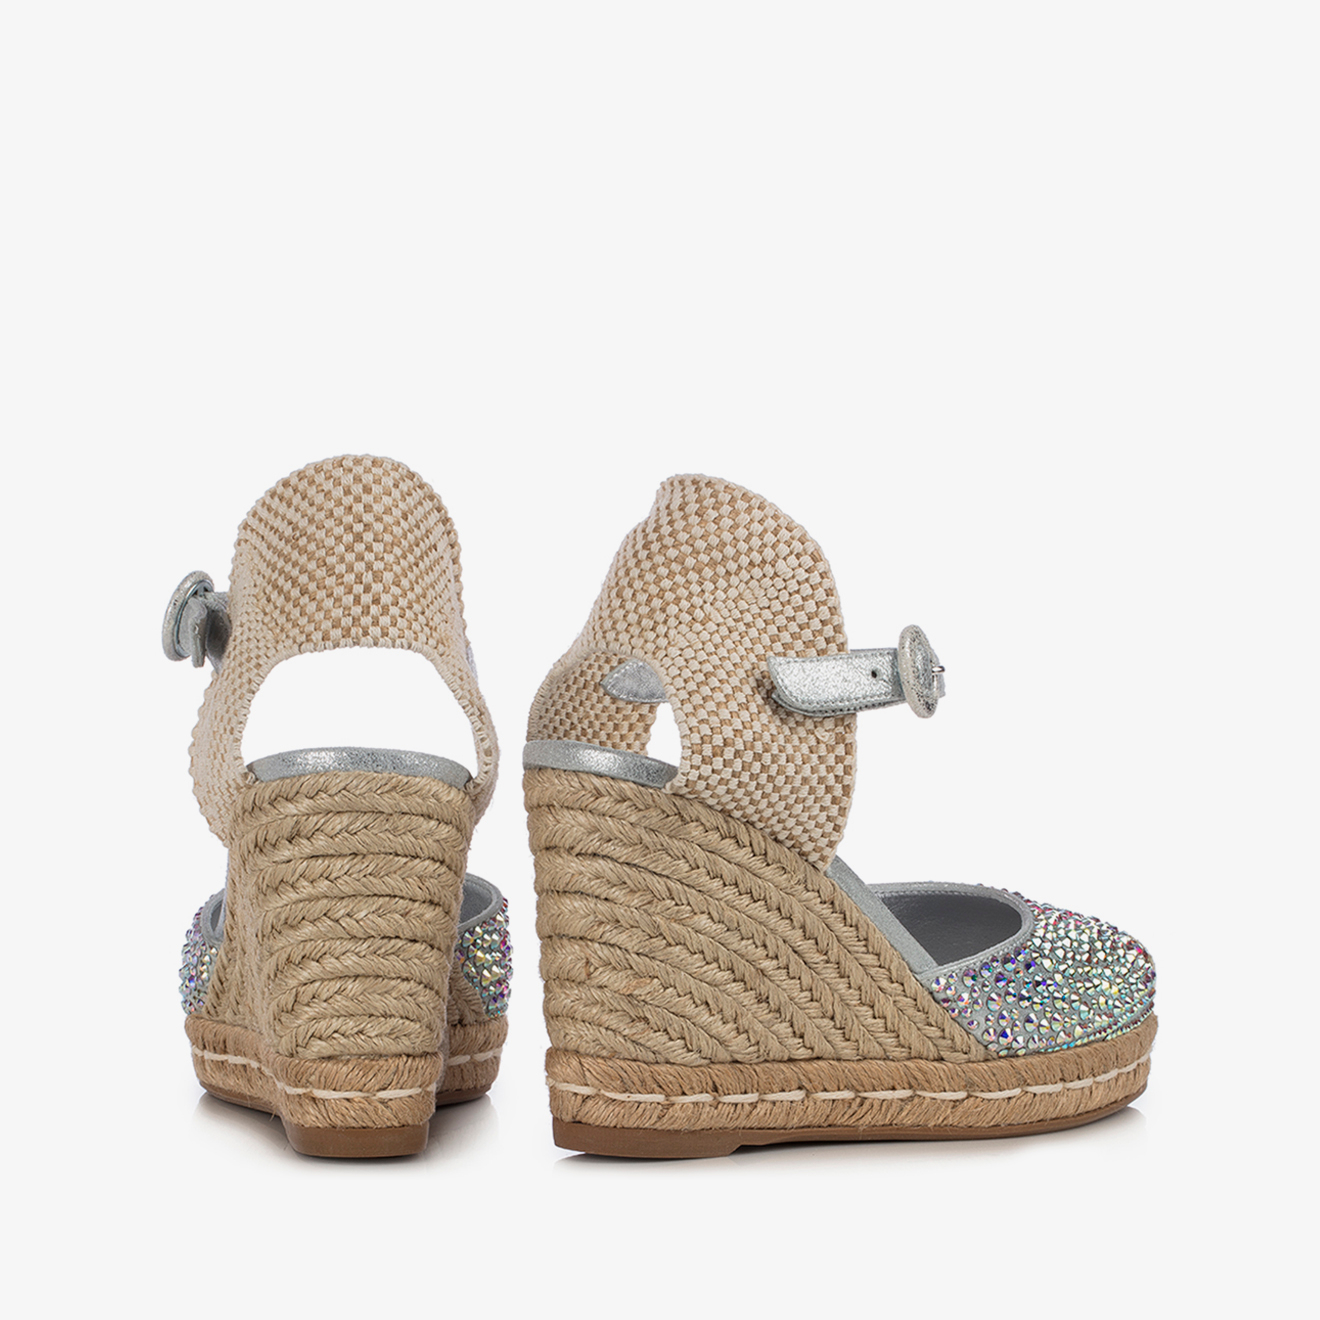 PRINCE ESPADRILLA 90 mm - Le Silla official outlet